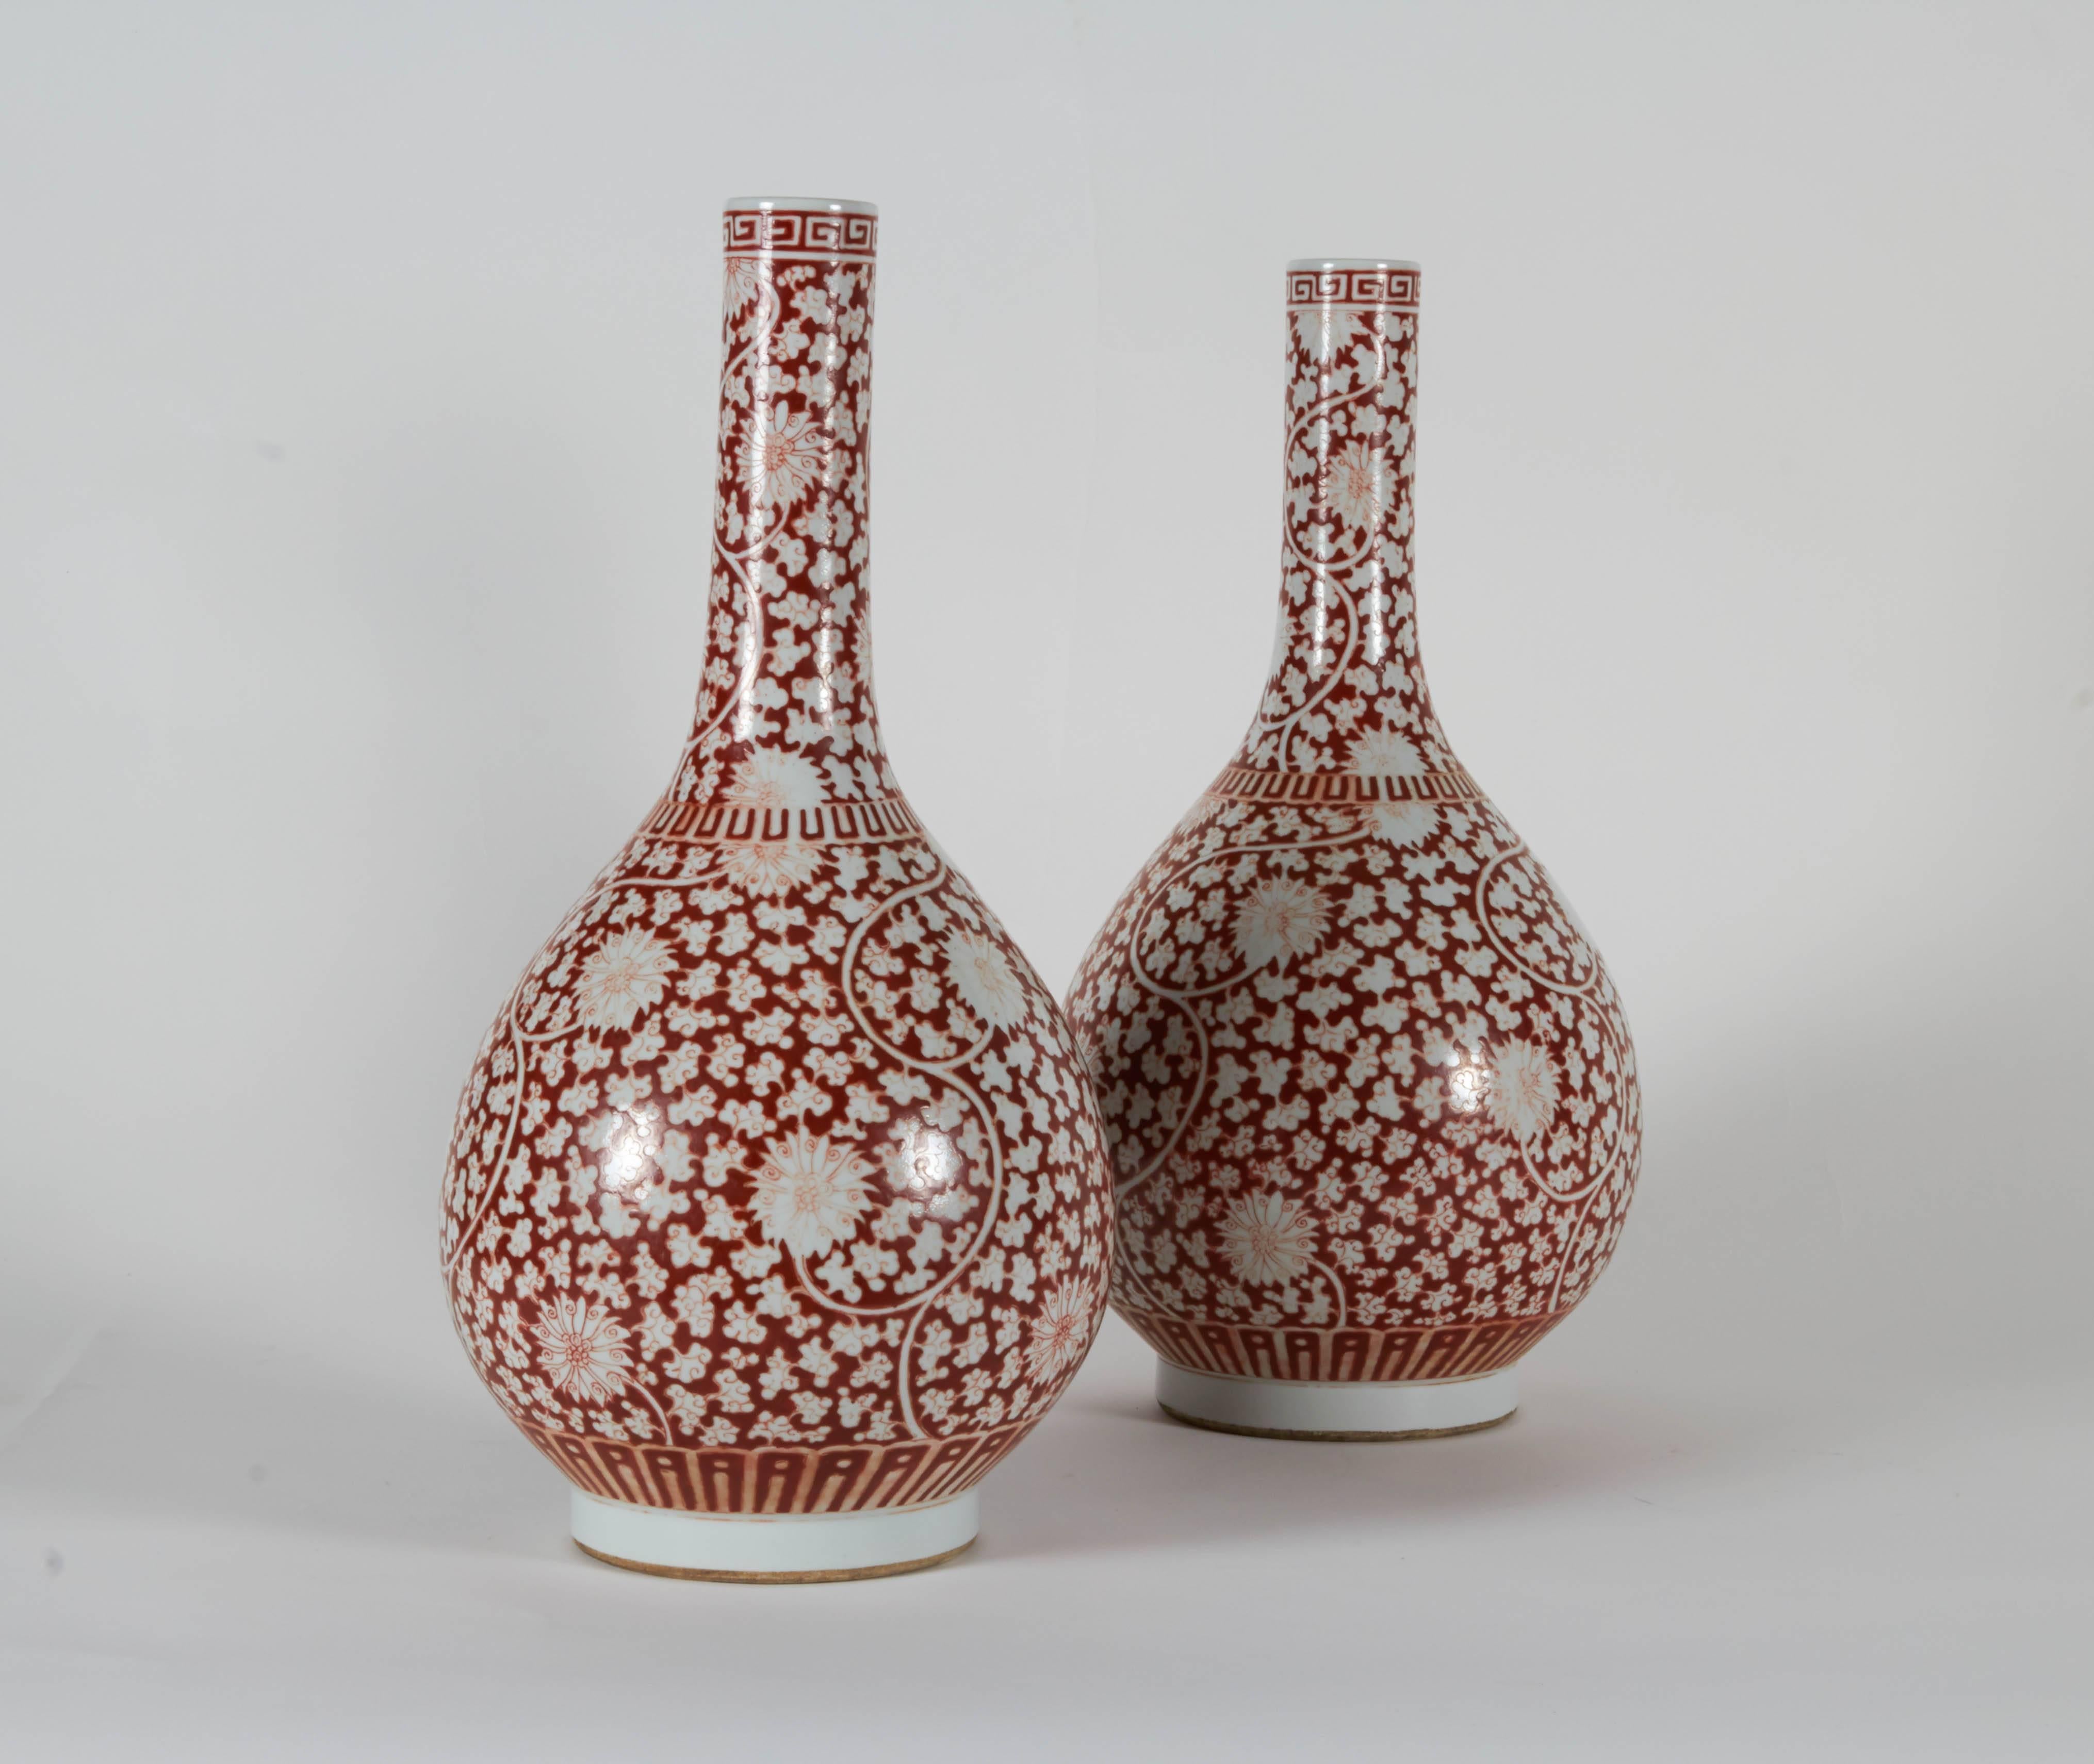 A fine pair of Chinese porcelain bottle-shaped vases, painted in the Islamic style,  Daoguang period (1821-1850).  Each vase finely handpainted in Henna colors with multi chrysanthemum flowers on a white background, further having Greek Key Scroll